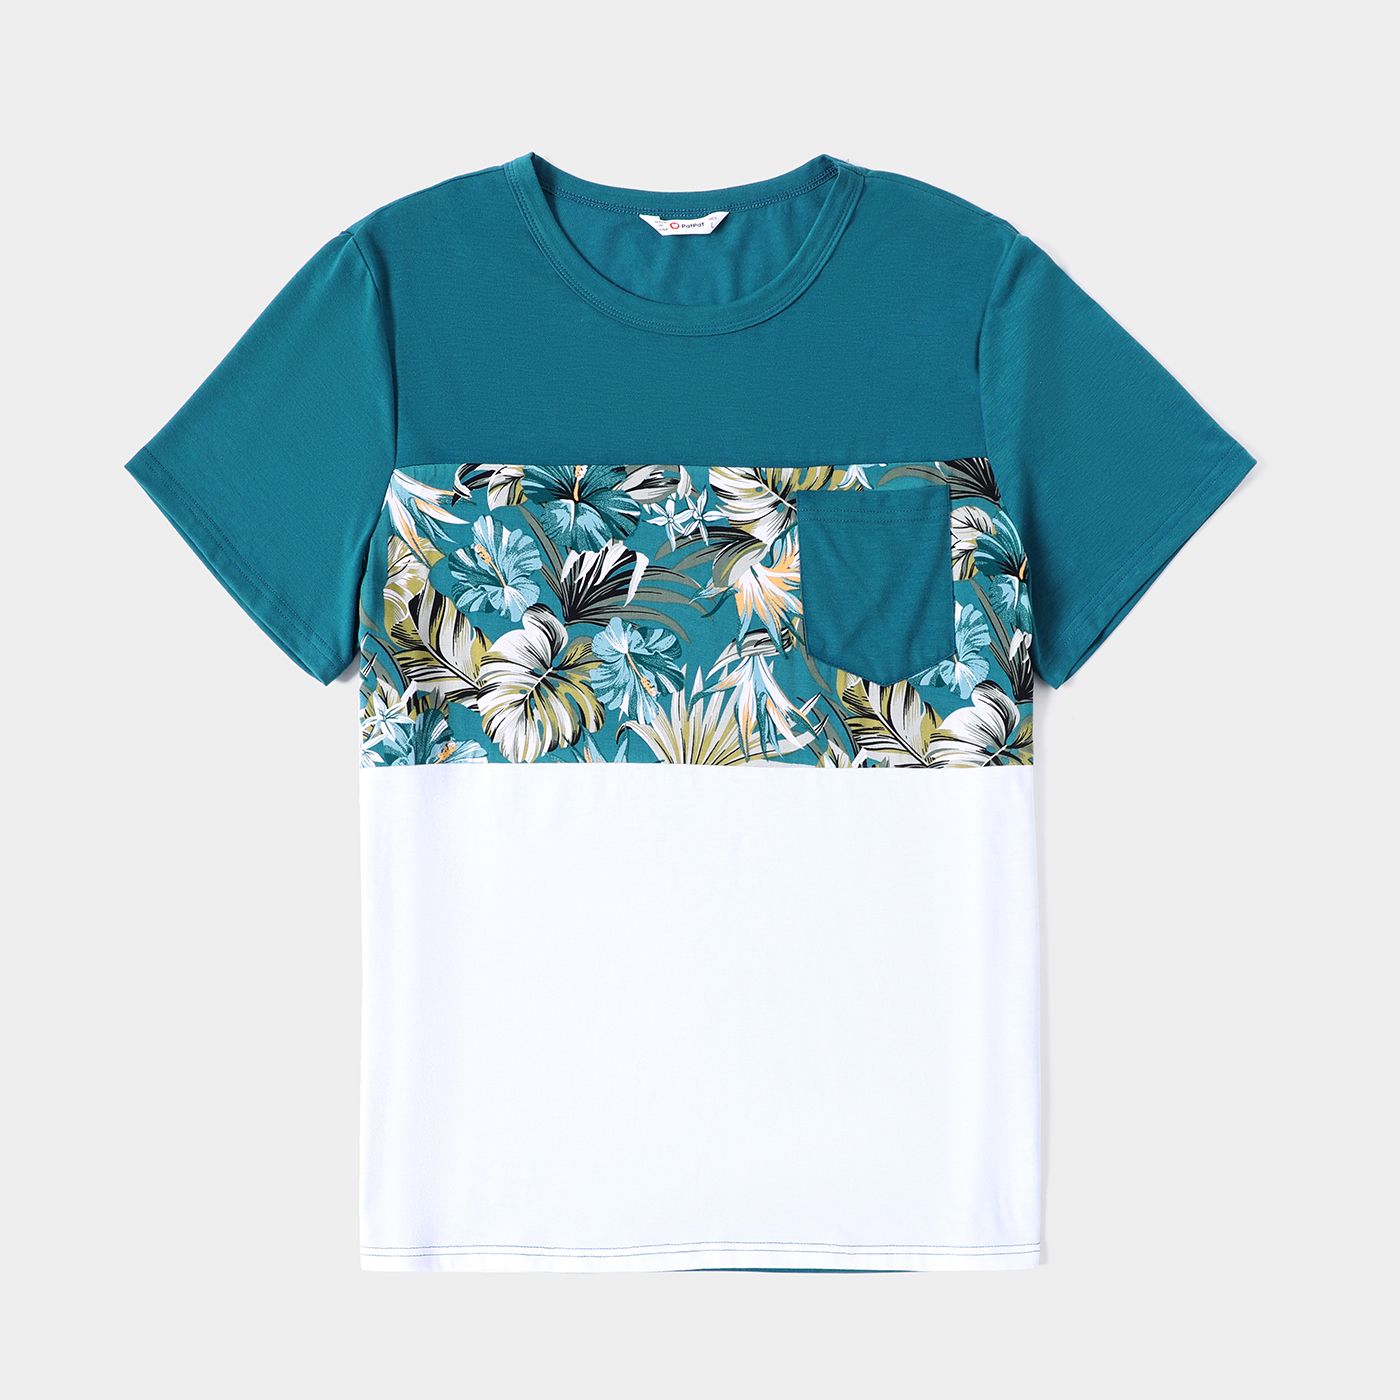 Family Matching All Over Floral Print Blue V Neck Ruffle Dresses and Short-sleeve Splicing T-shirts 